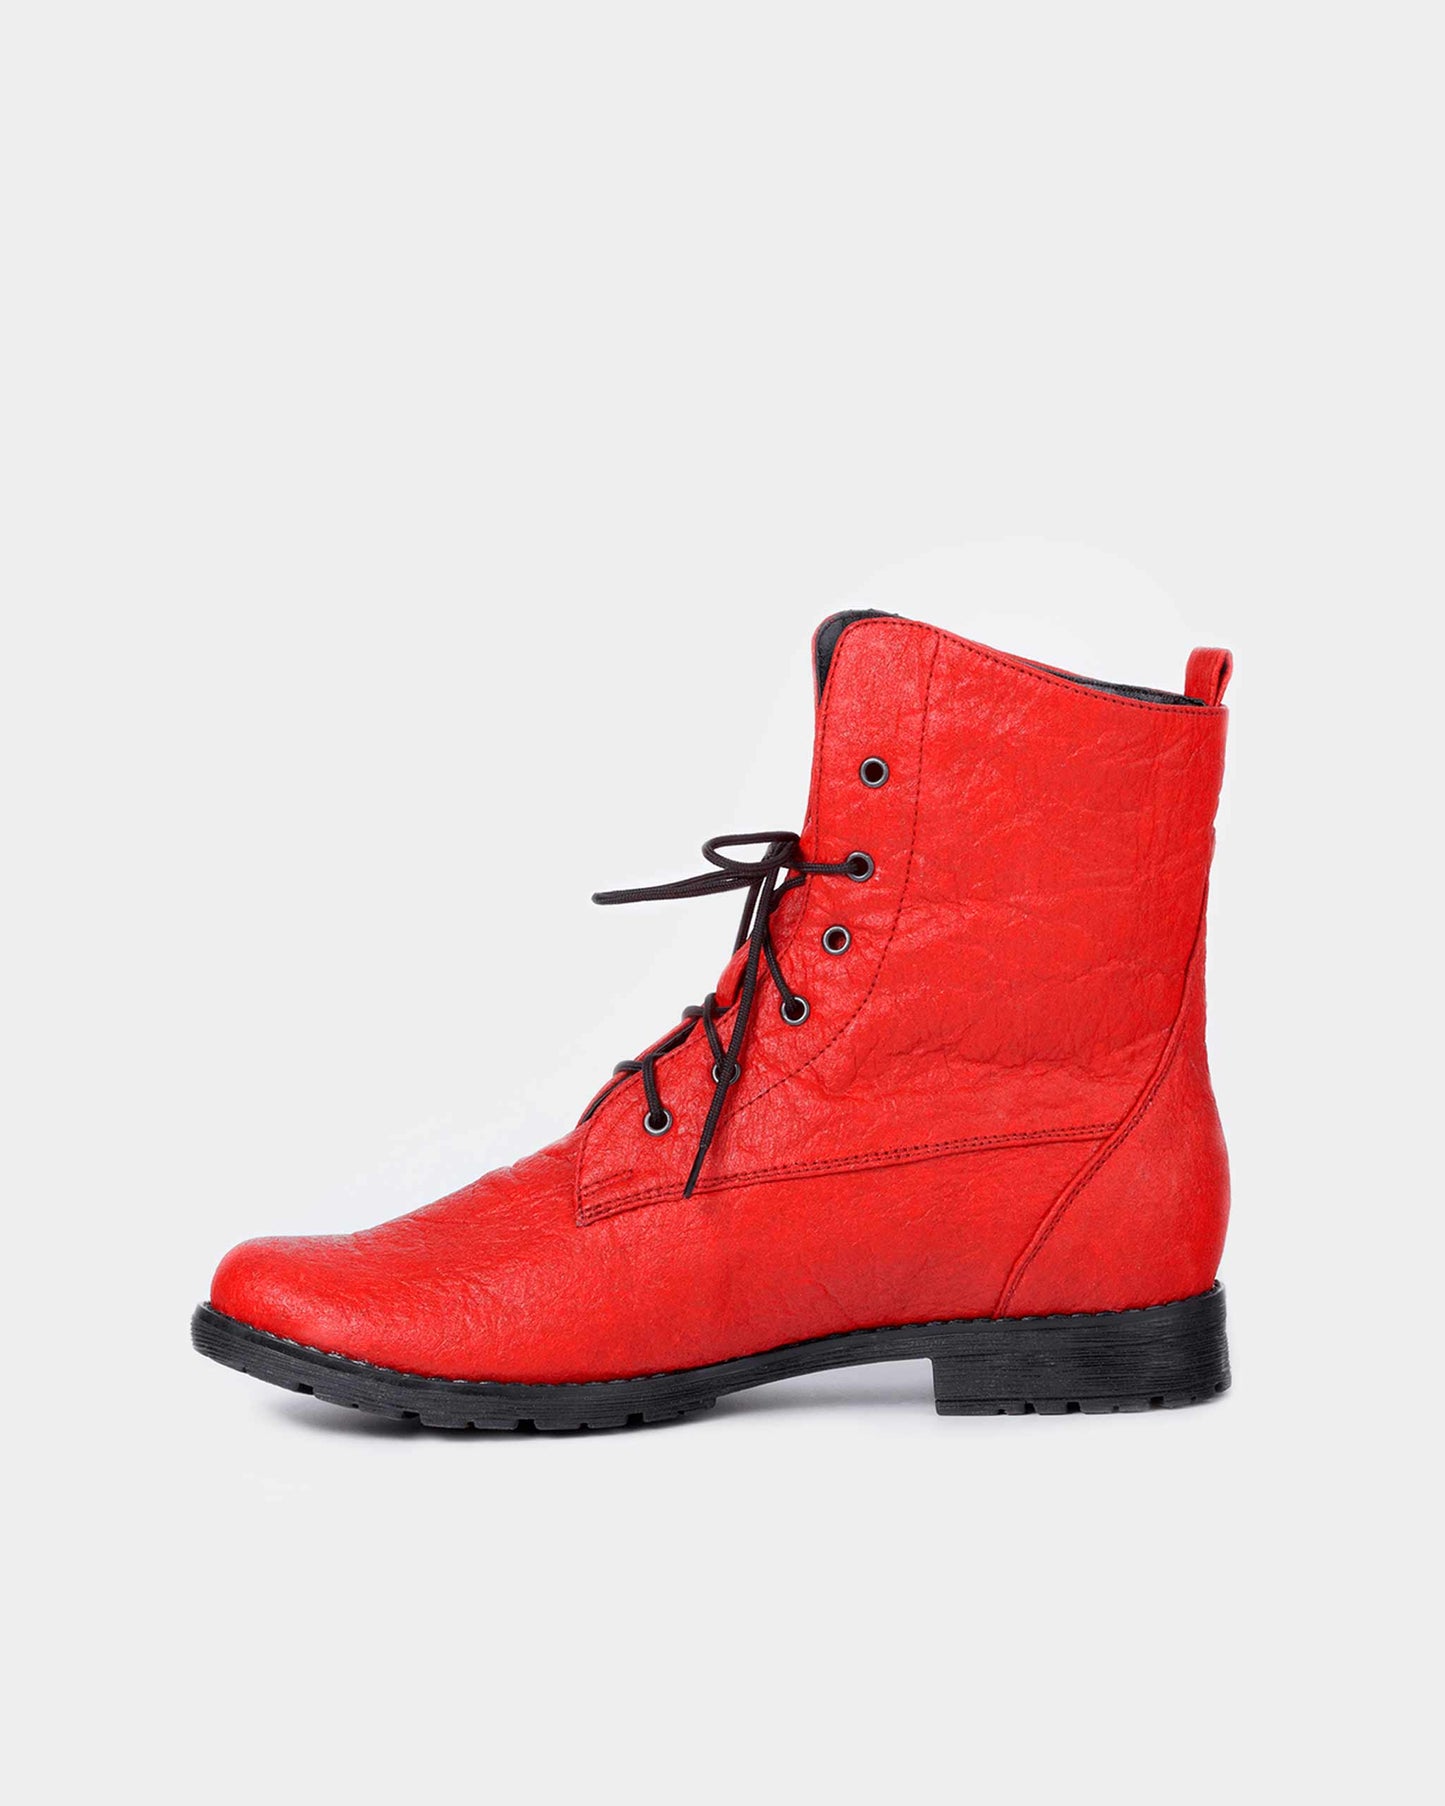 Workers No. 2 Paprika  Pina pineapple leather ankle boots - sample sale